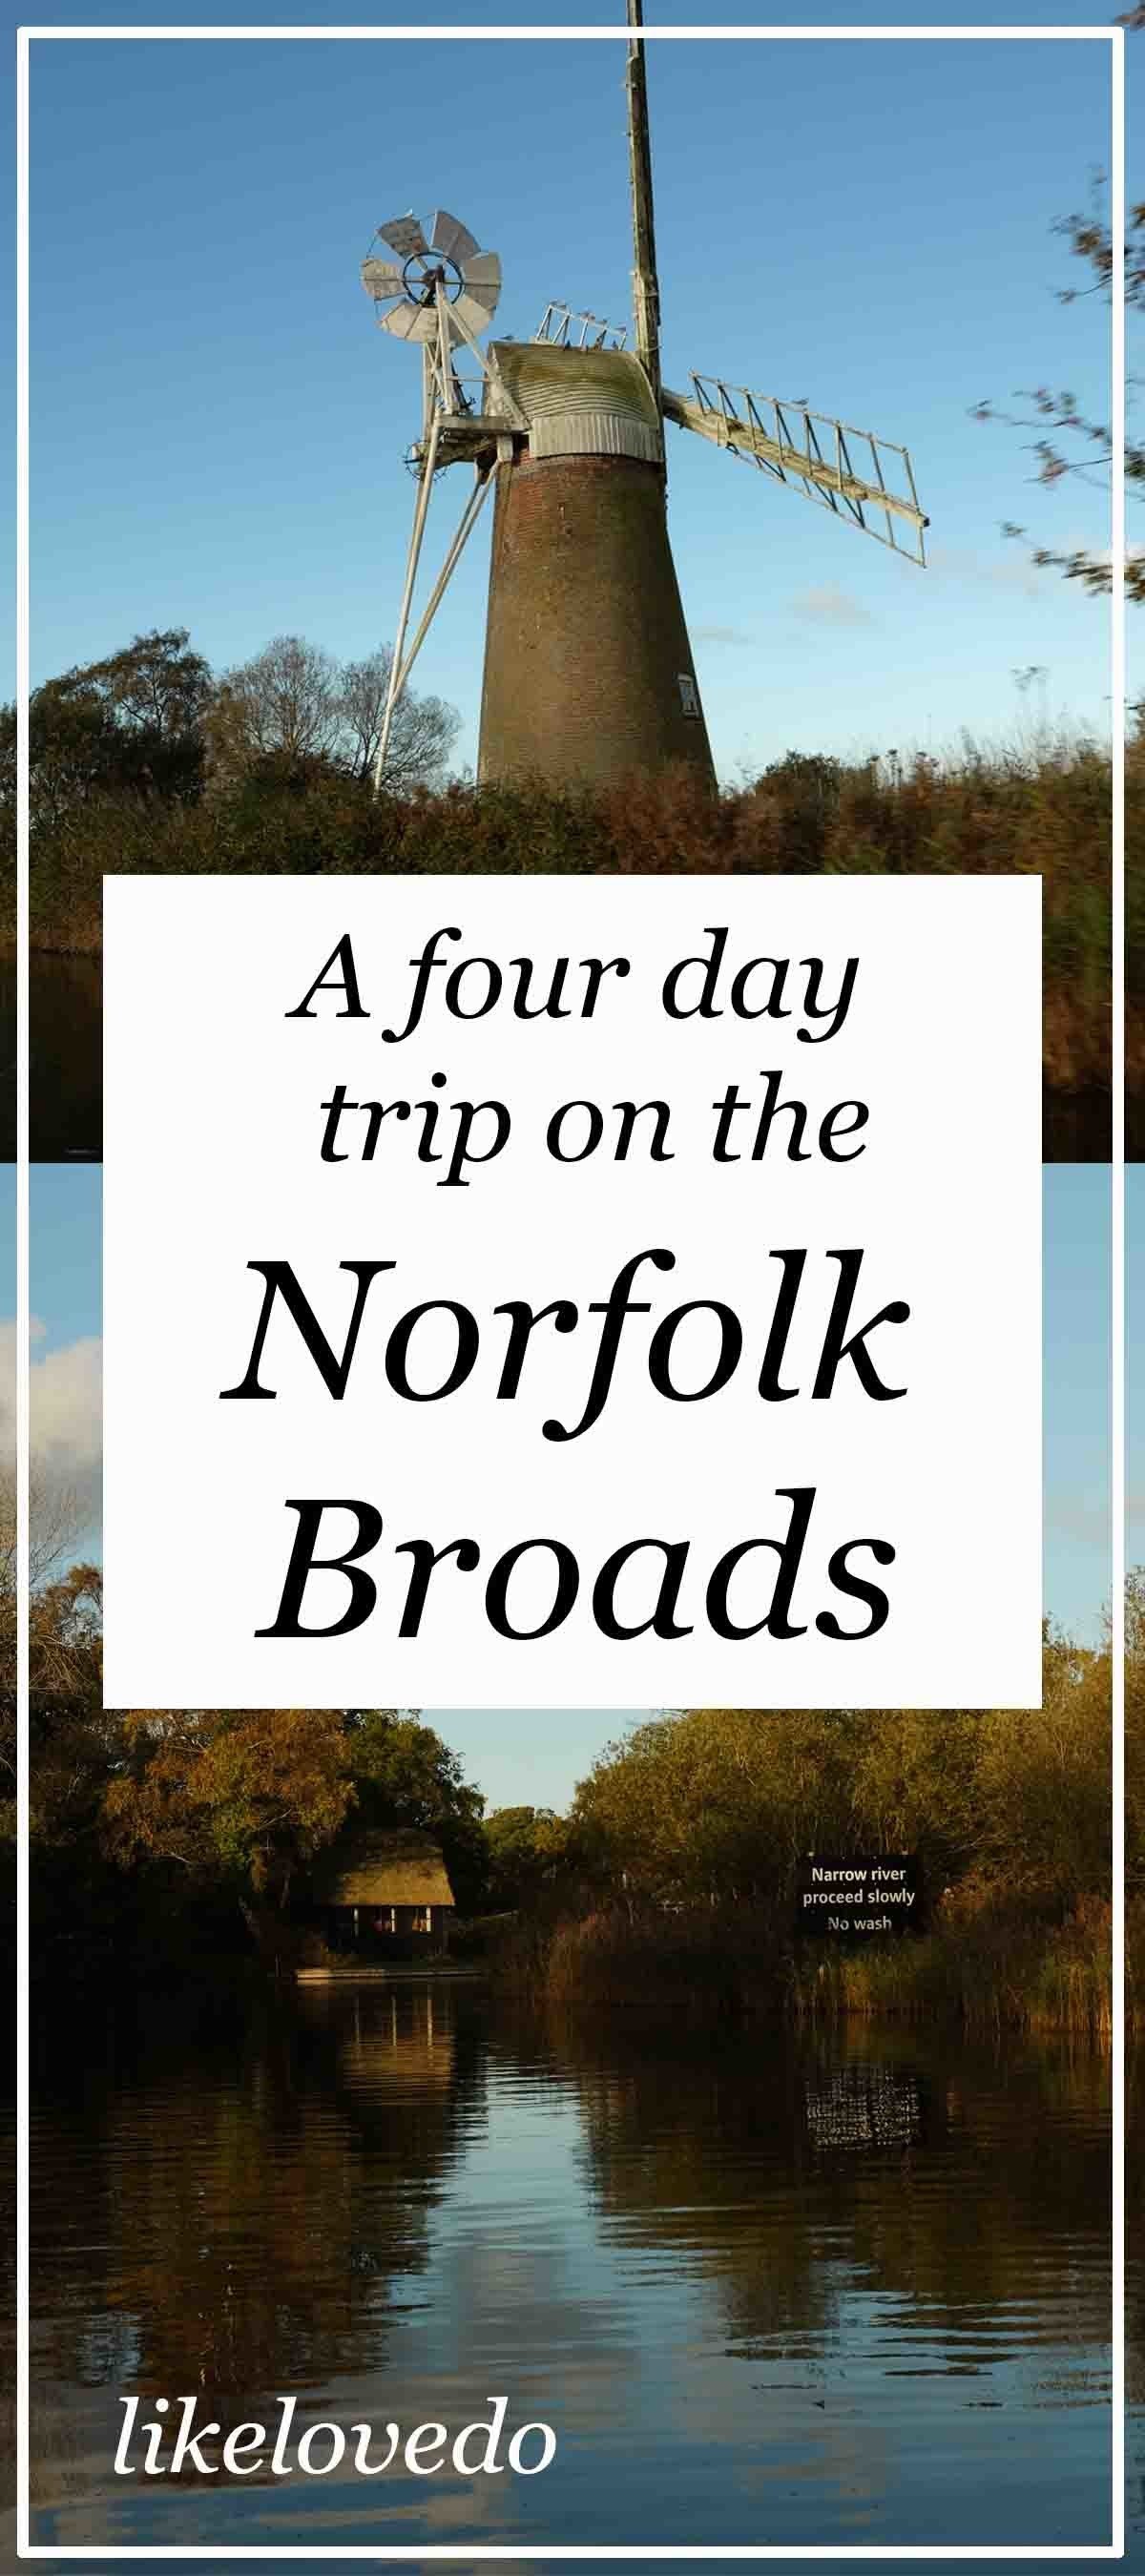 A four day trip on the Norfolk Broads Itinerary plan for a staycation images of boats